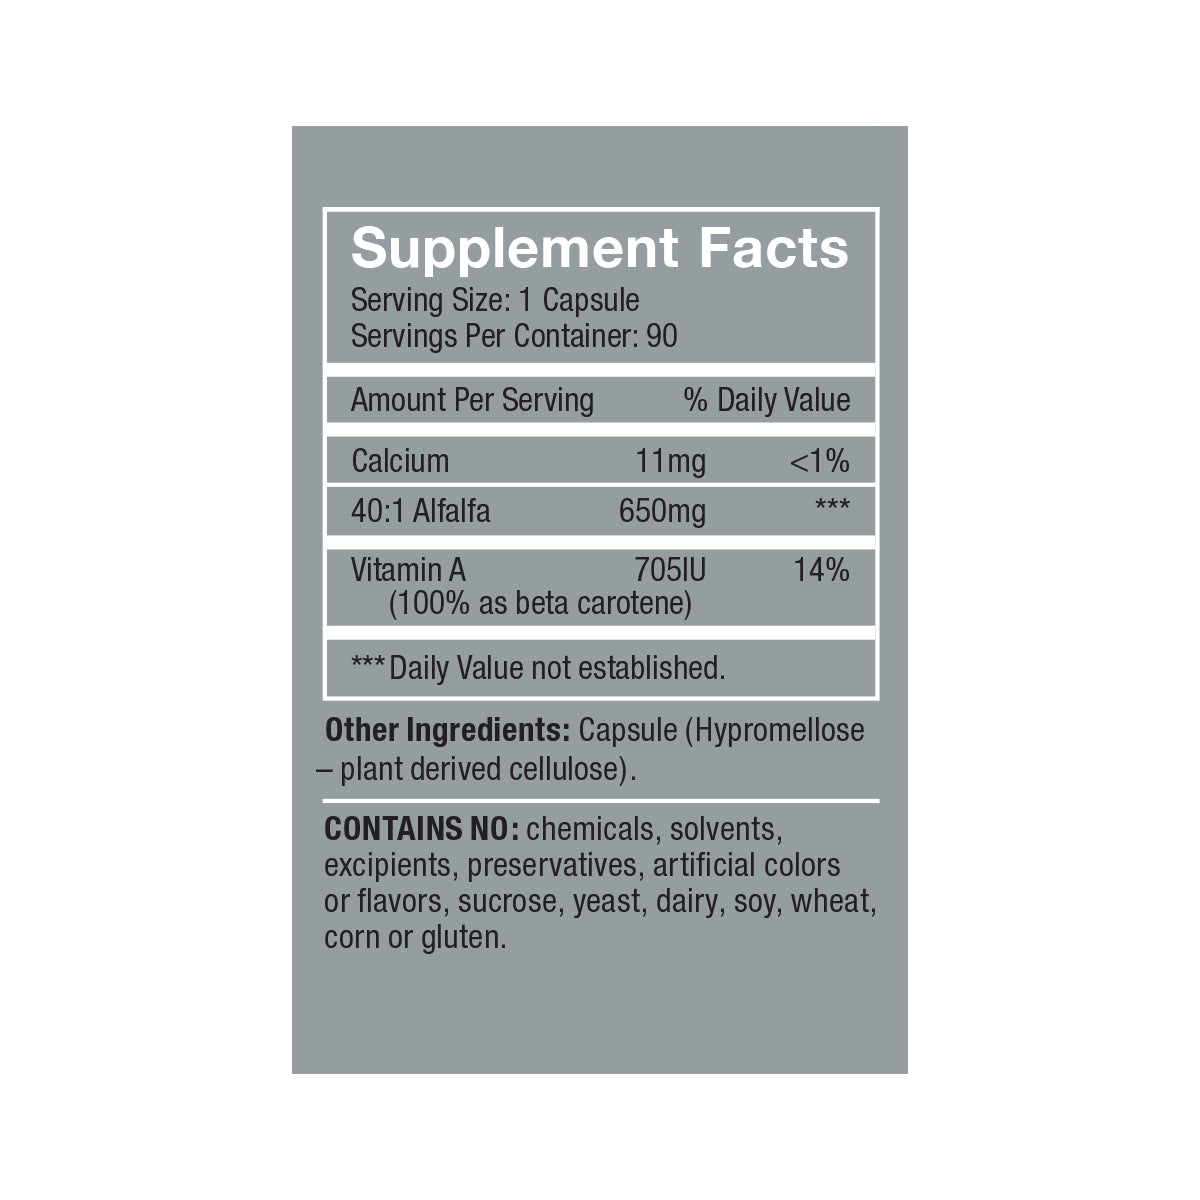 pH Quintessence side panel product box supplement facts, white/black text on dark gray background: Serving size 1 capsule, servings per container 90, Amount Per Serving % Daily Value, Calcium 11mg, 40:1 Alfalfa 650mg ***, Vitamin A 705IU 14% (100% as beta carotene), ***Daily Value not established. Other ingredient: capsule (Hypromellose—plant derived cellulose), contains no: chemicals, solents, ecipients, preservatives, artificial colors or flavors, sucrose, yeast, dairy, soy, wheat, corn or gluten